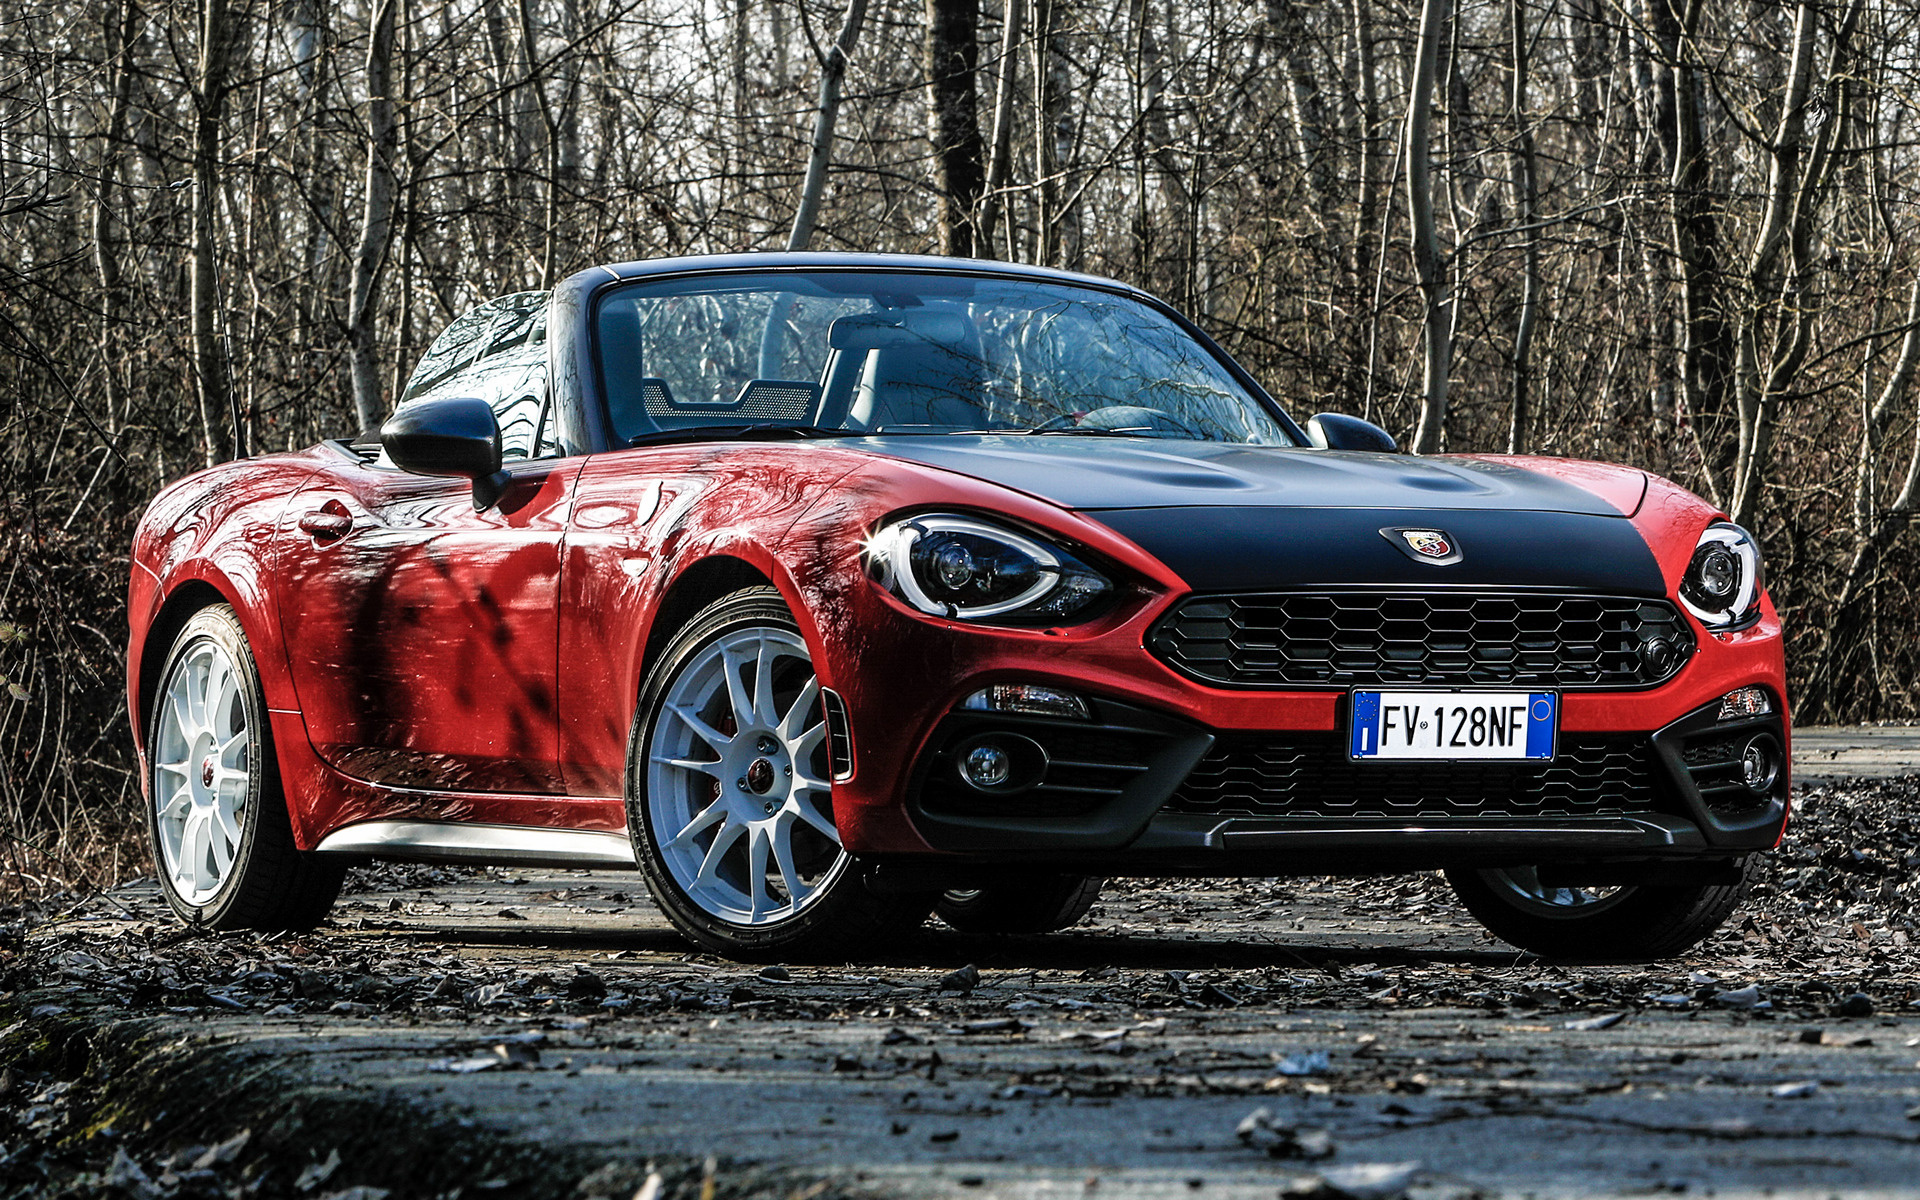 Fiat 124 Spider, Abarth rally tribute, HD images, Italian roadster, 1920x1200 HD Desktop